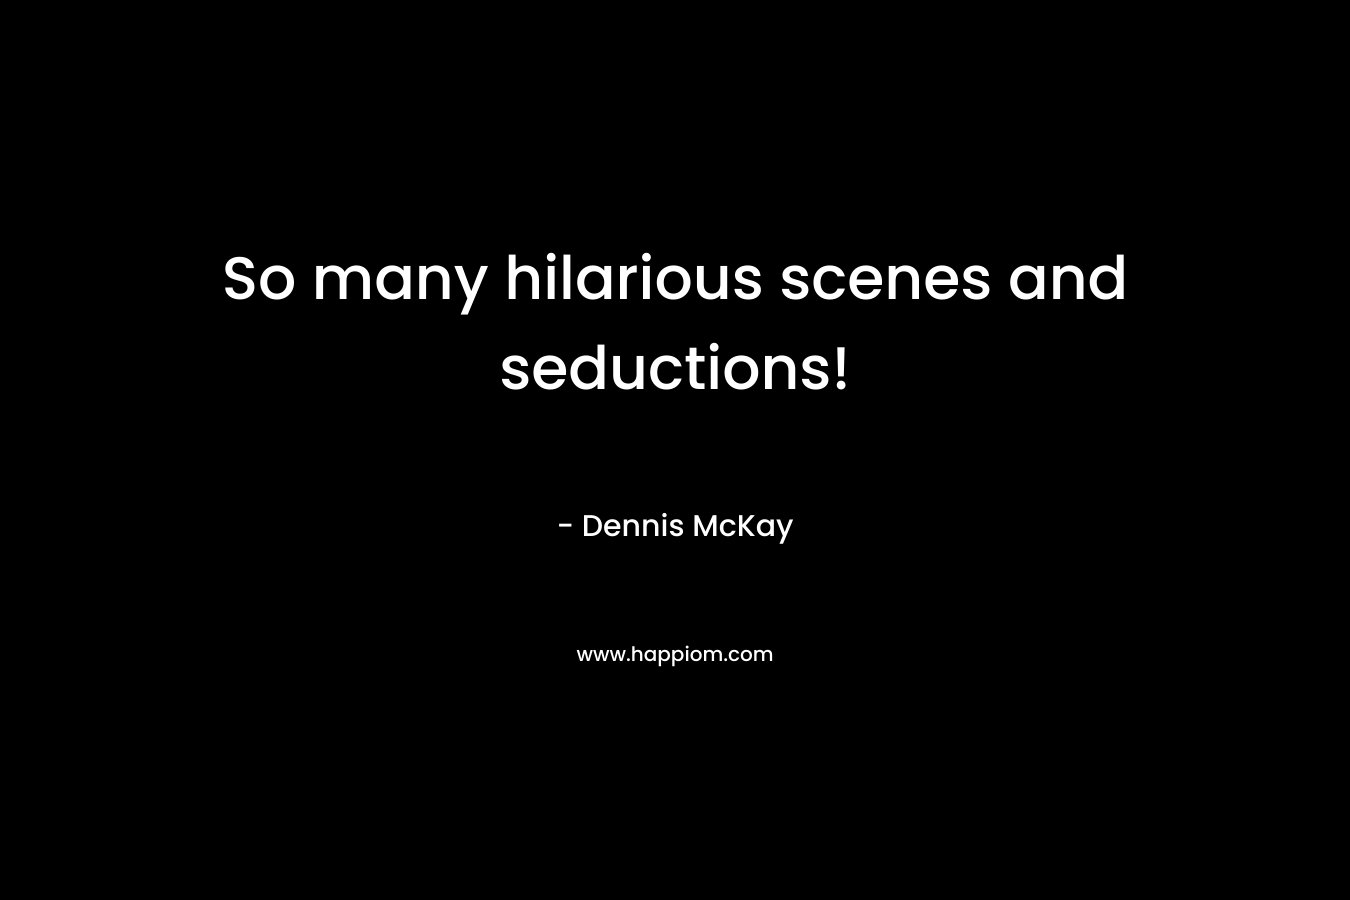 So many hilarious scenes and seductions! – Dennis McKay